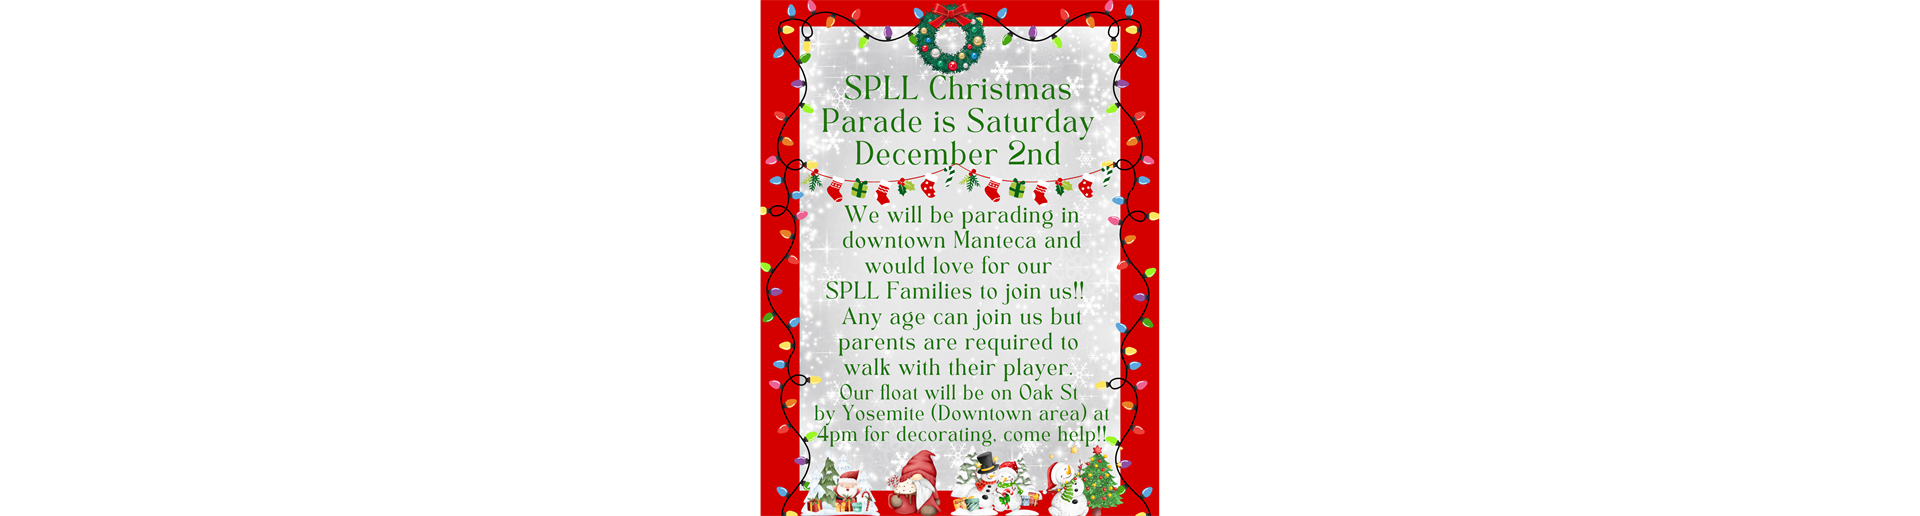 SPLL is in the Christmas Parade Dec 2!